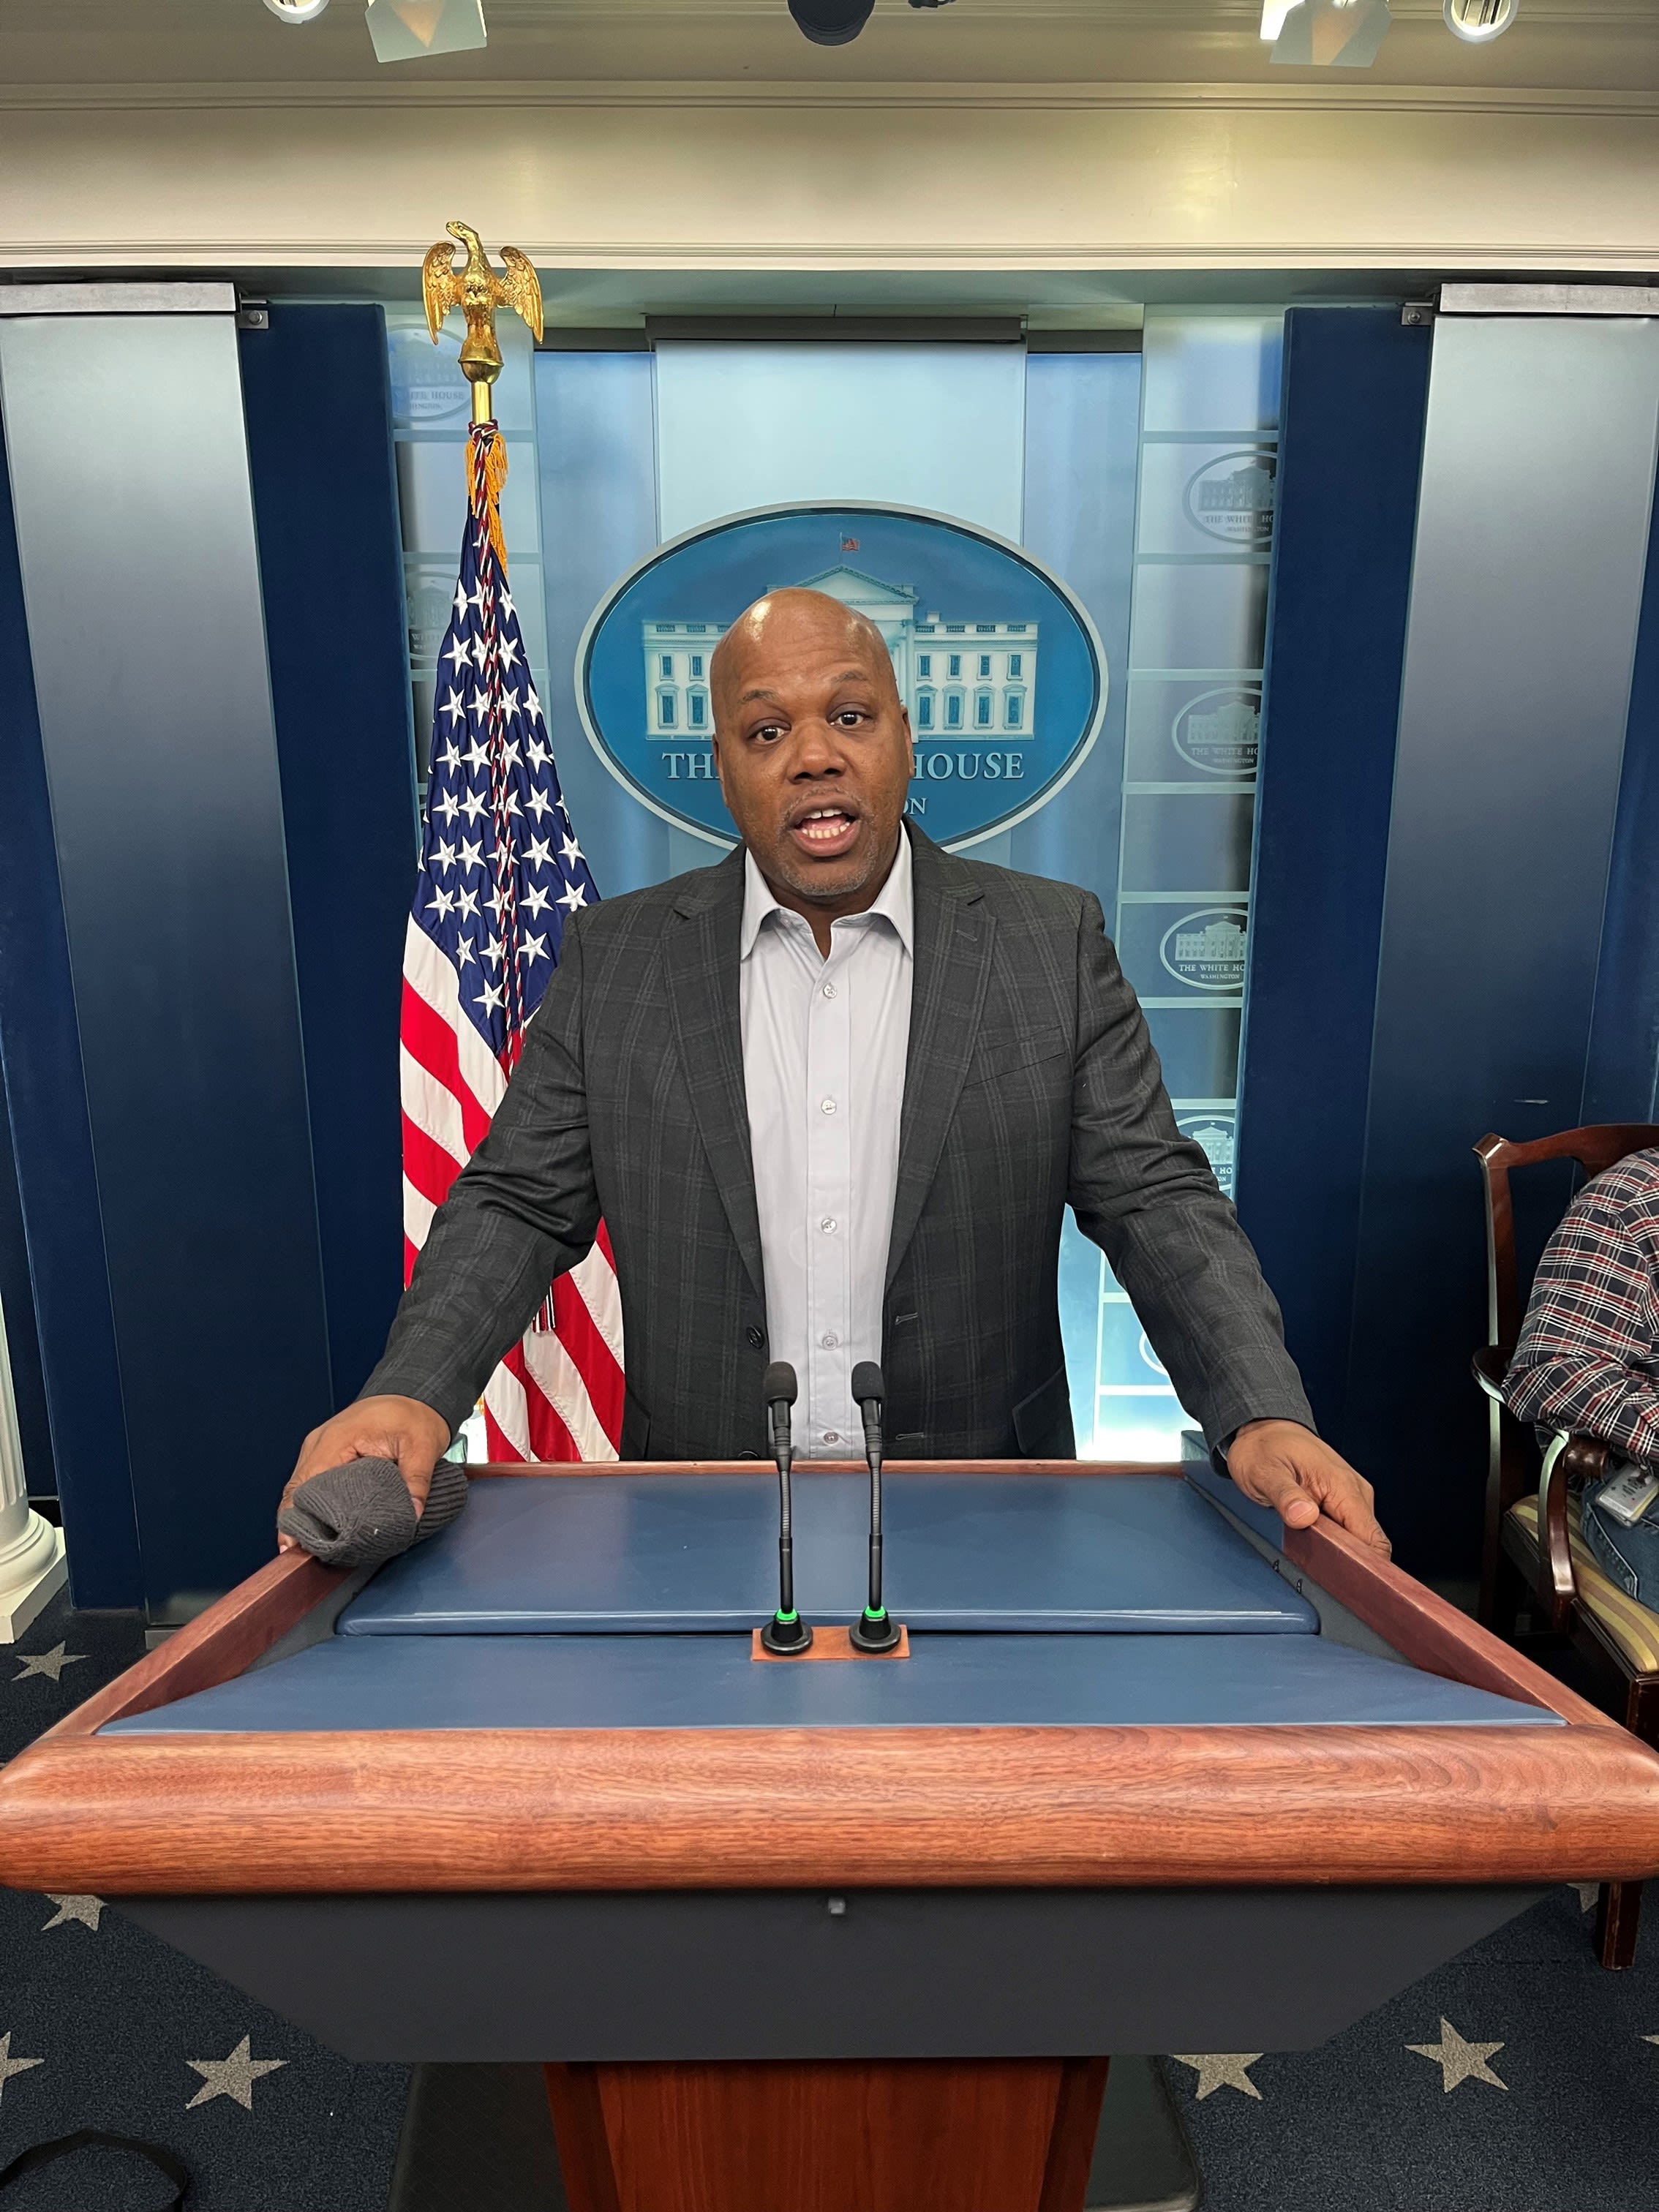 Too Short photographed at podium in White House briefing room.